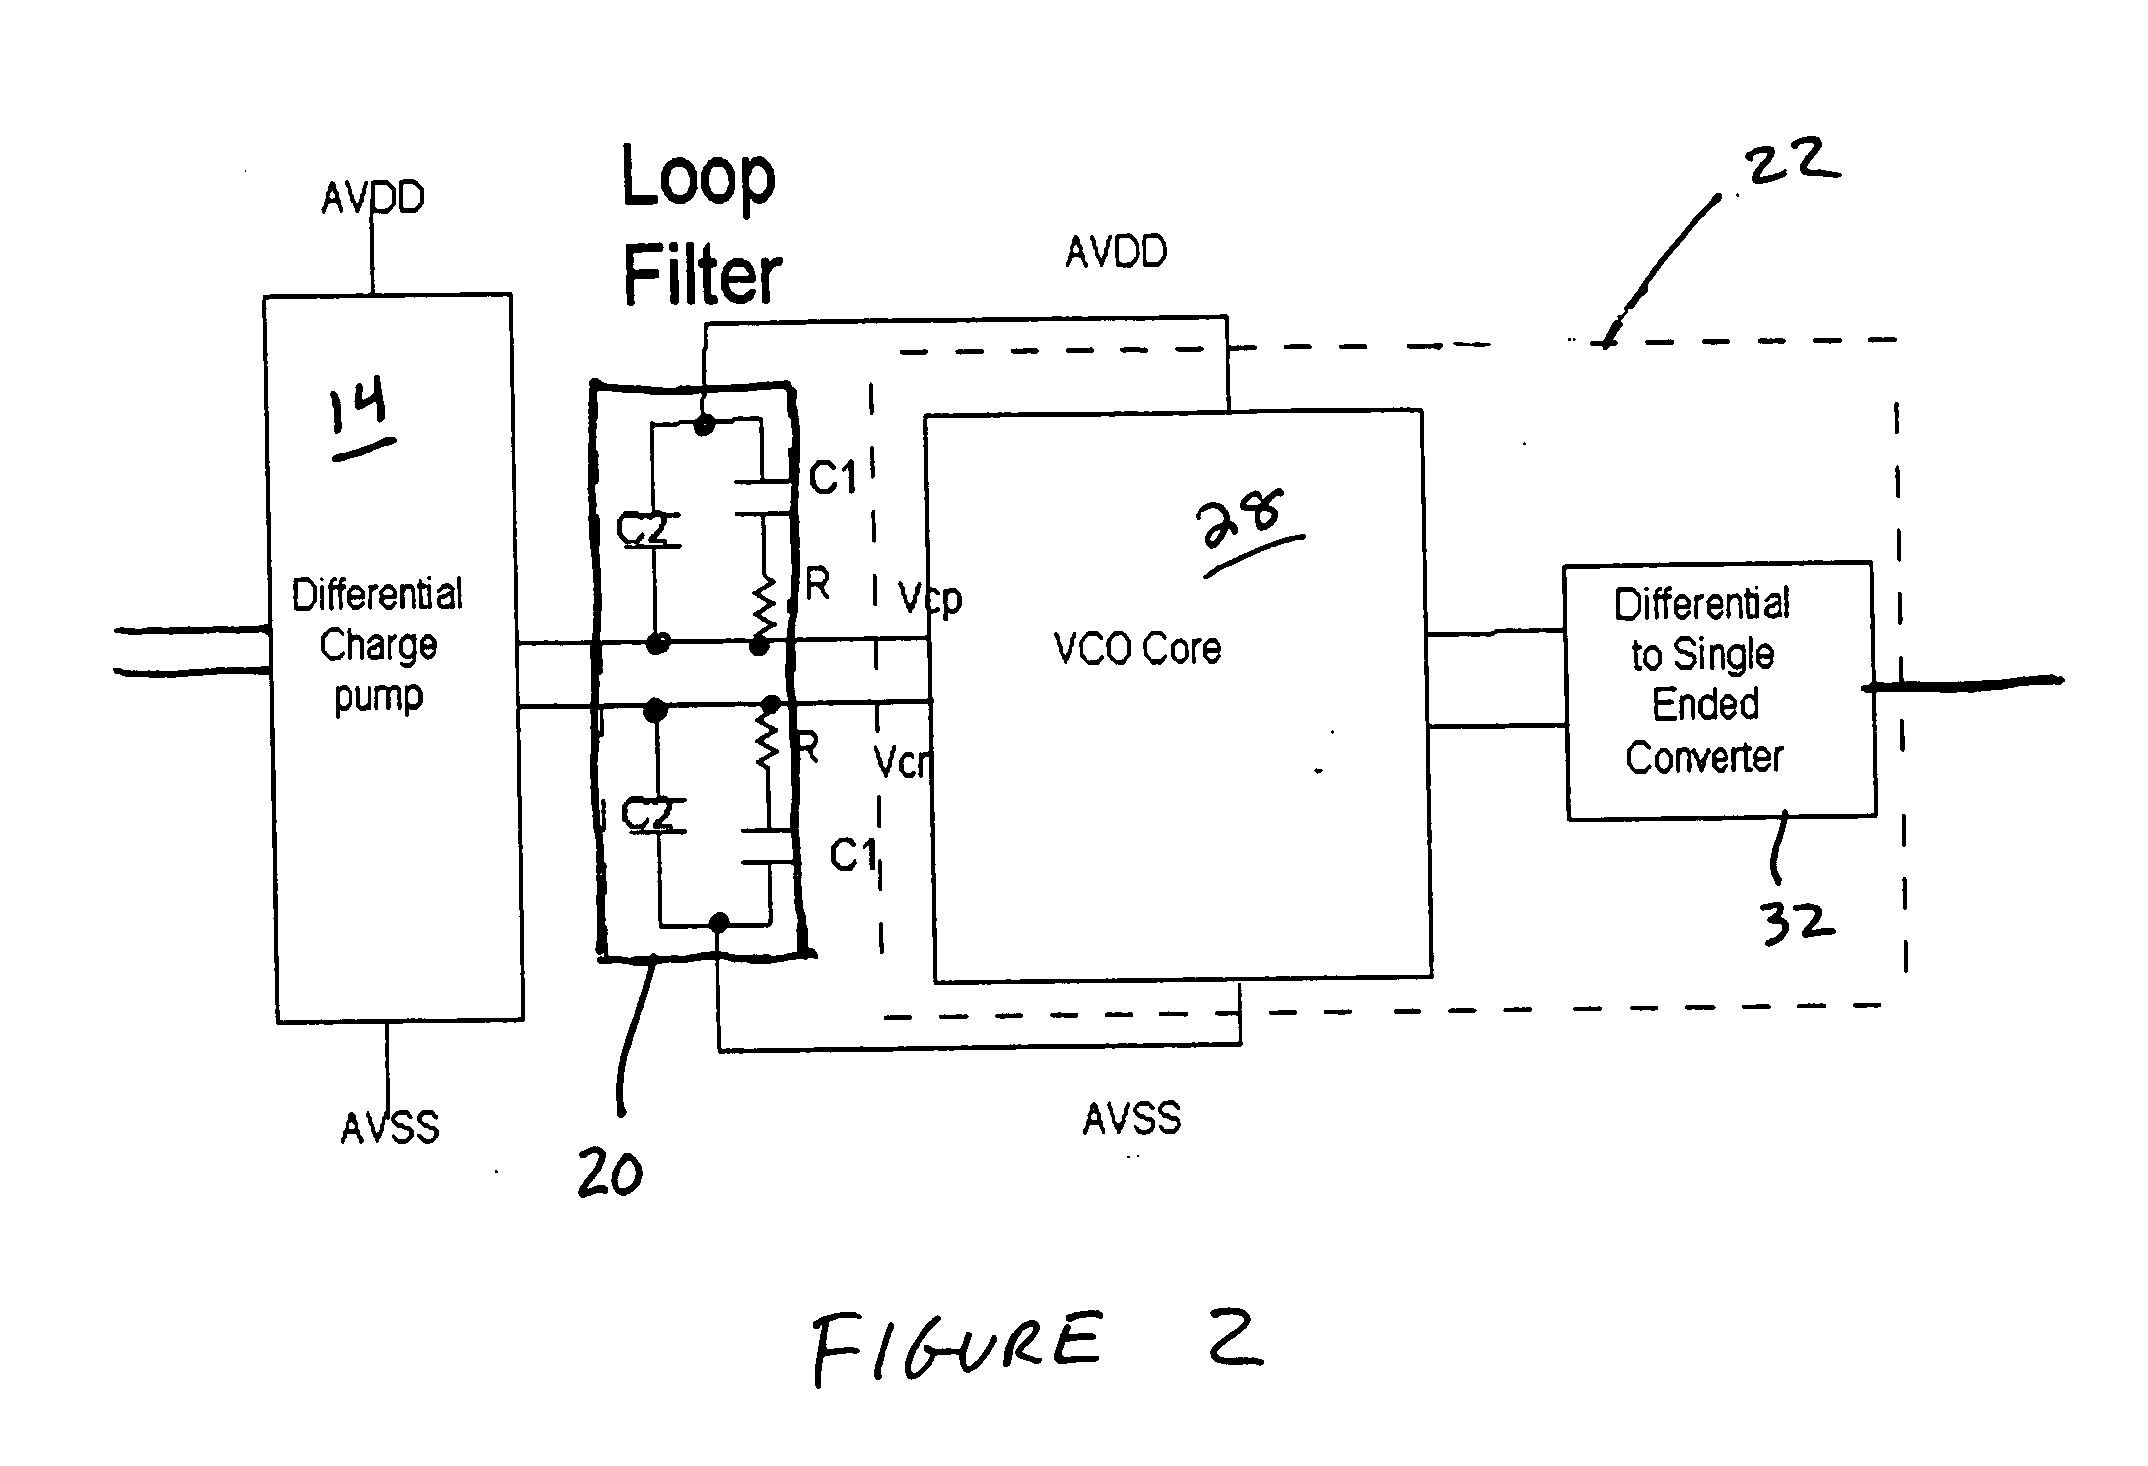 High performance analog charge pumped phase locked loop (PLL) architecture with process and temperature compensation in closed loop bandwidth